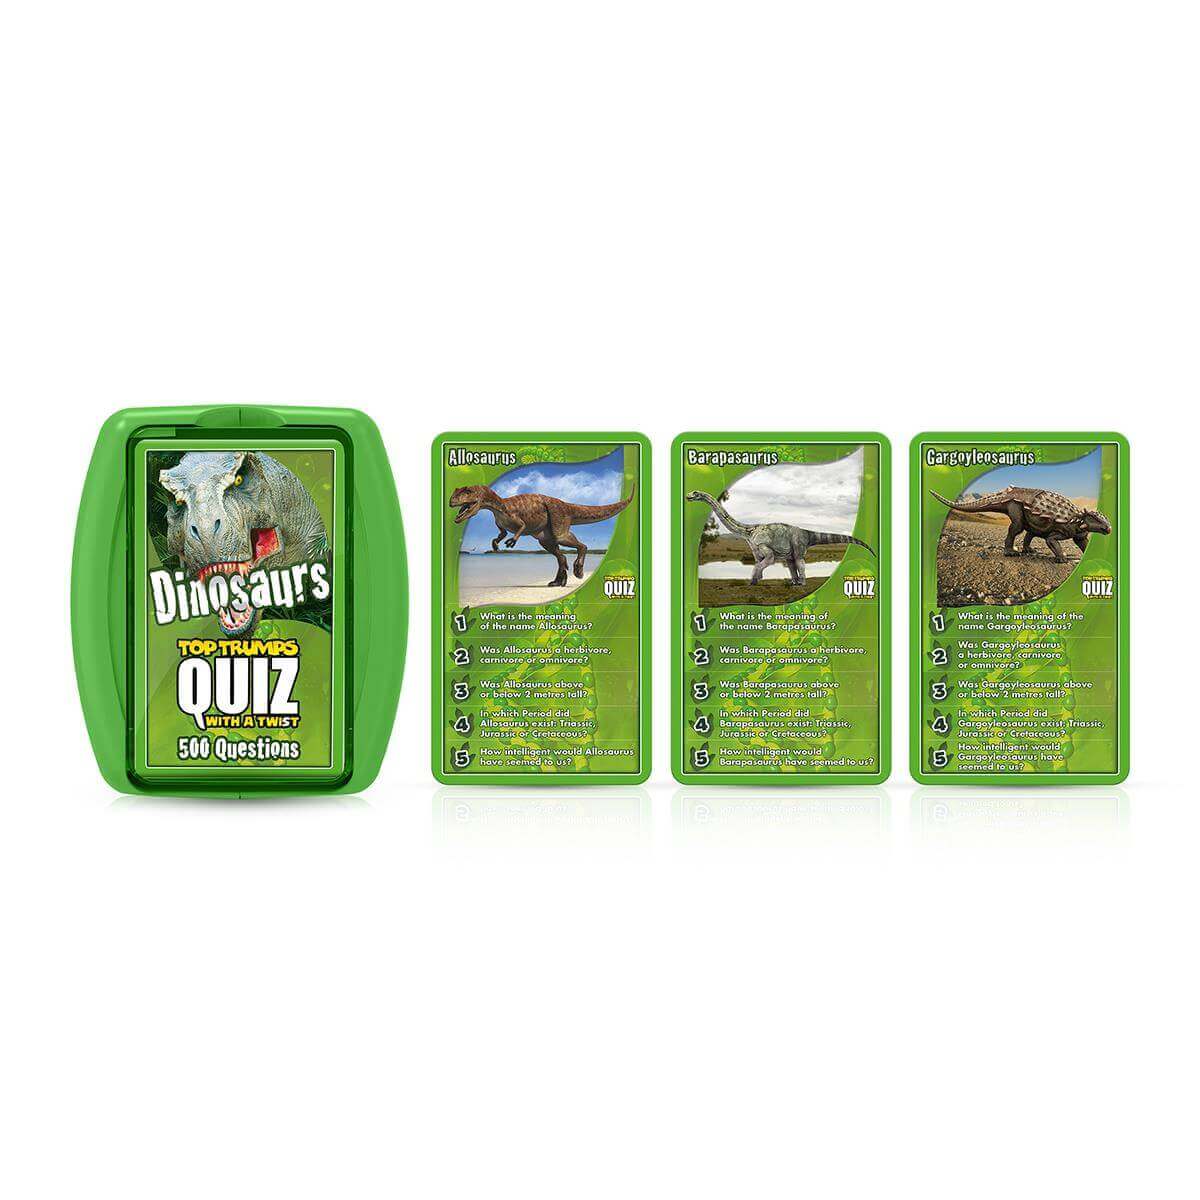 Dinosaurs Top Trumps Quiz Card Game - Inspire Newquay